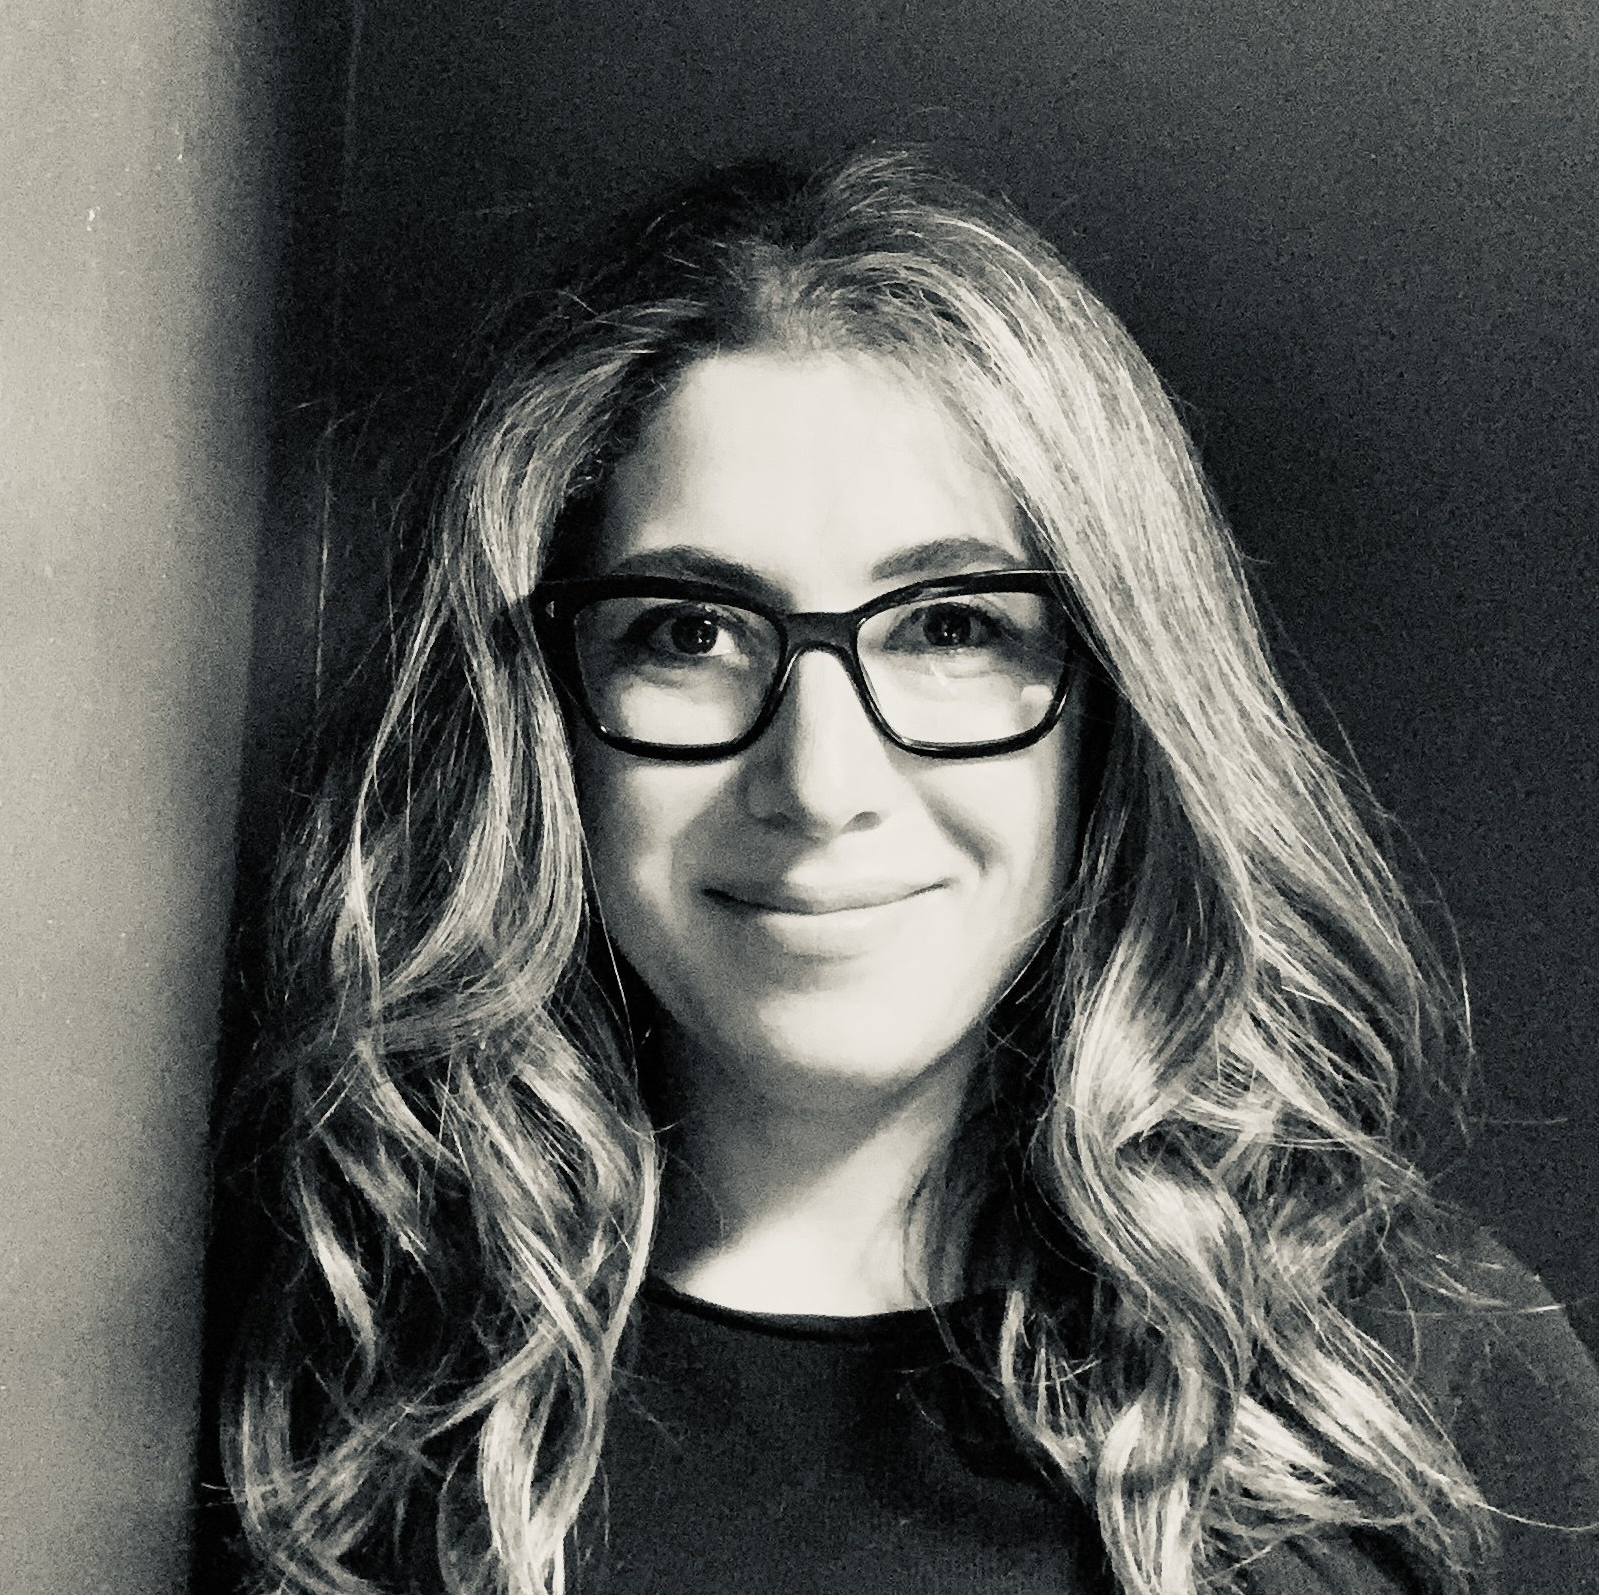 Black and white headshot of Lauren Fridling, a white woman with long wavy hair and black rectangular glasses. She is wearing a black shirt.